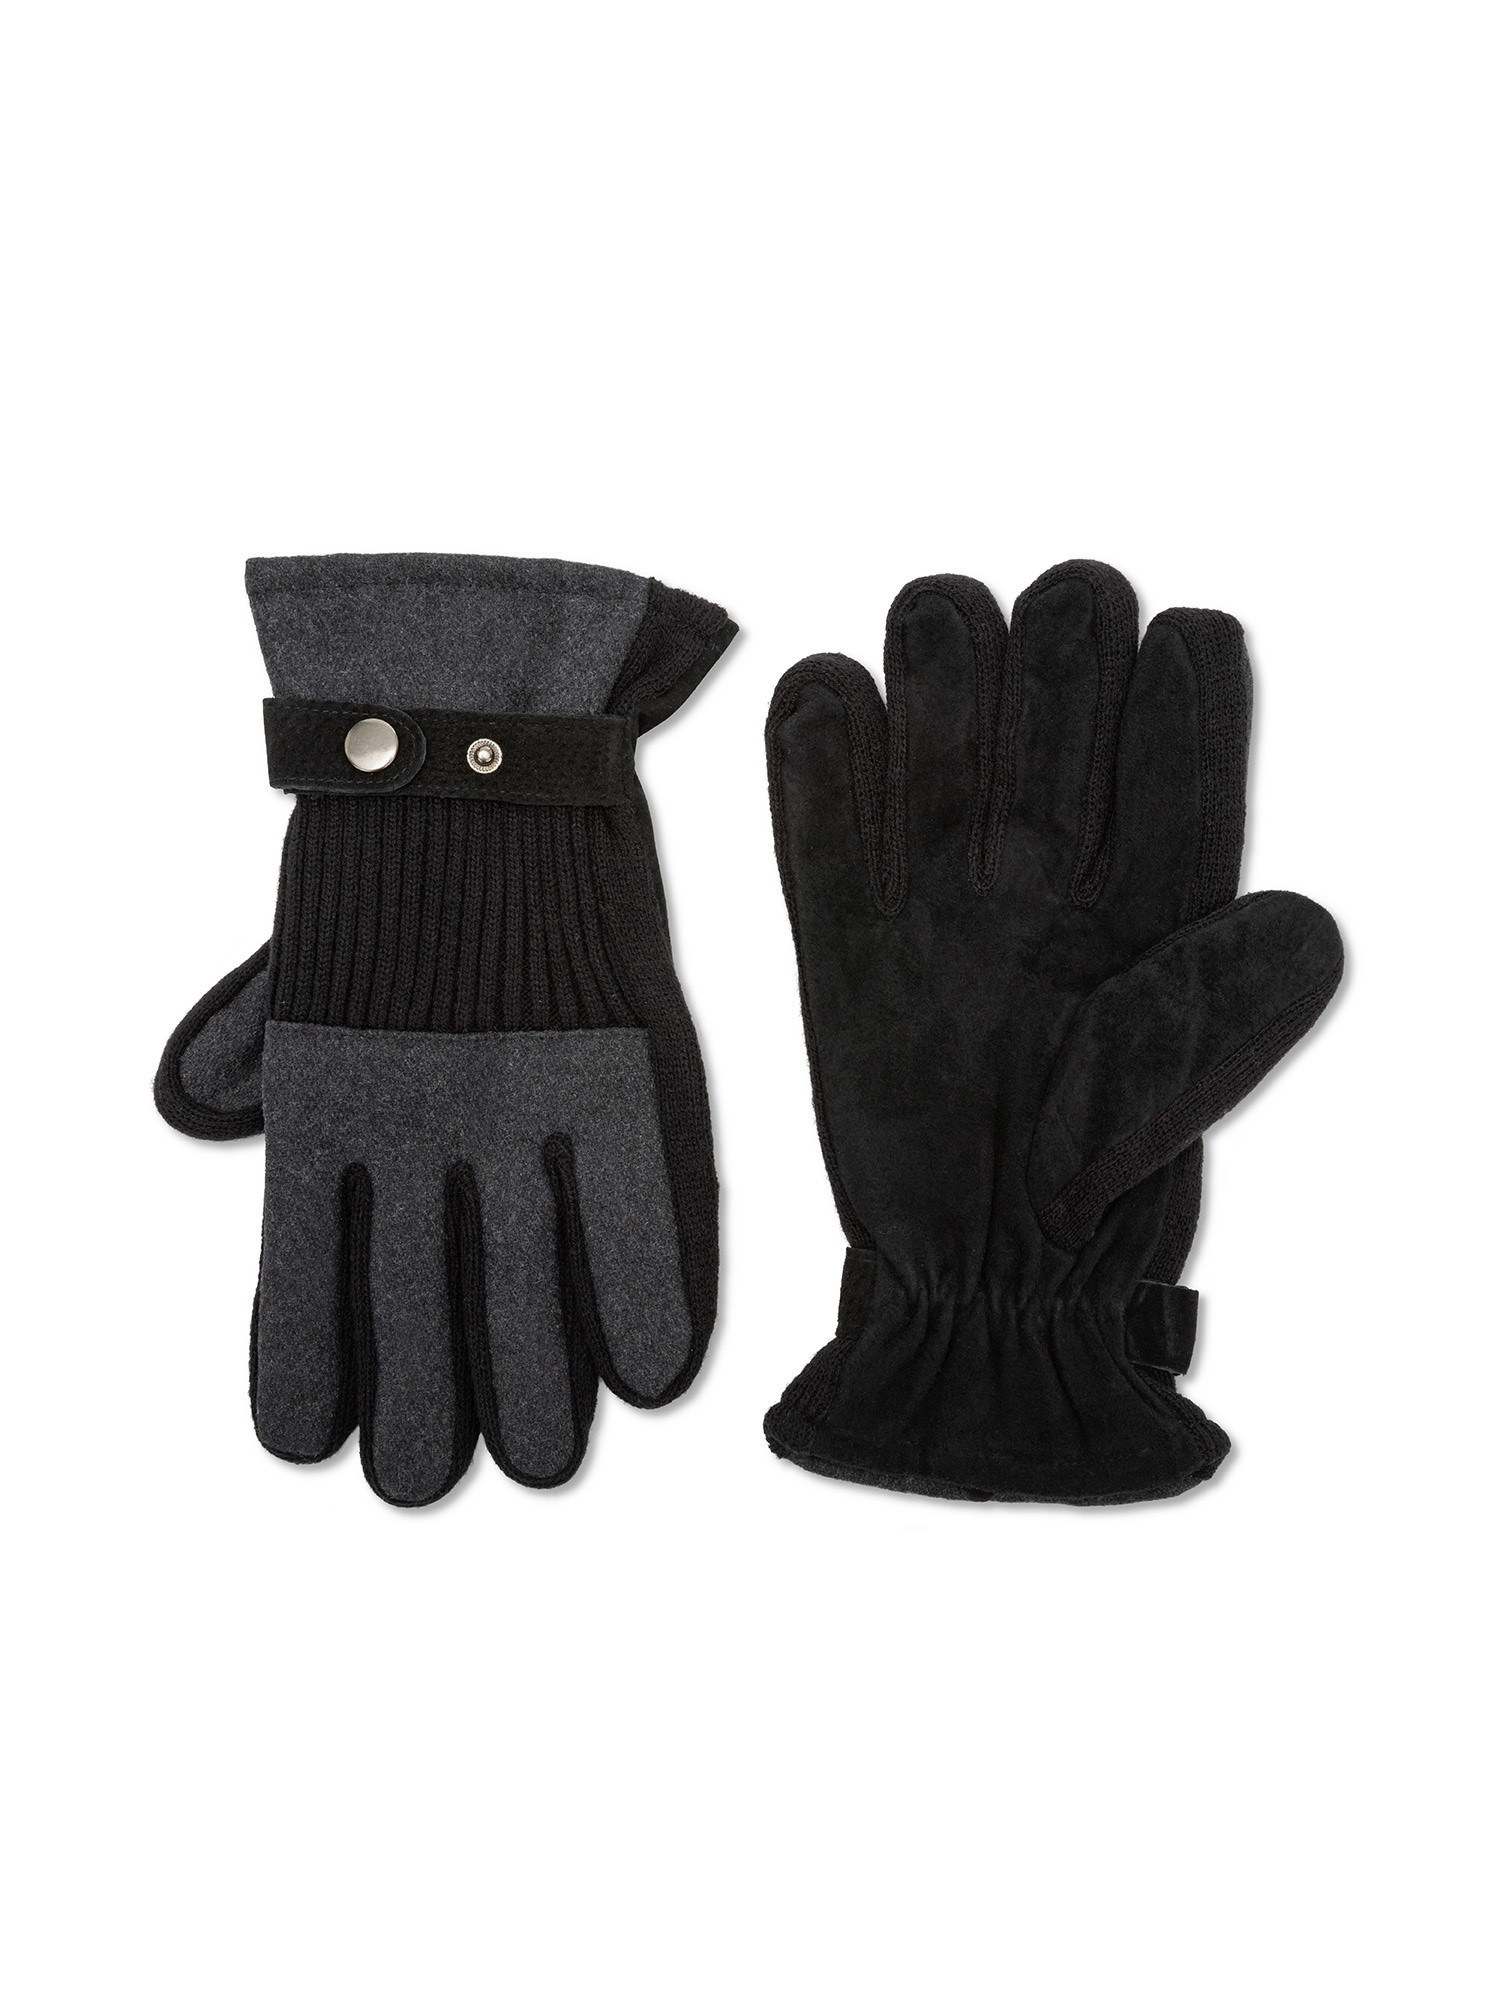 Luca D'Altieri - Gloves with strap, Grey, large image number 0